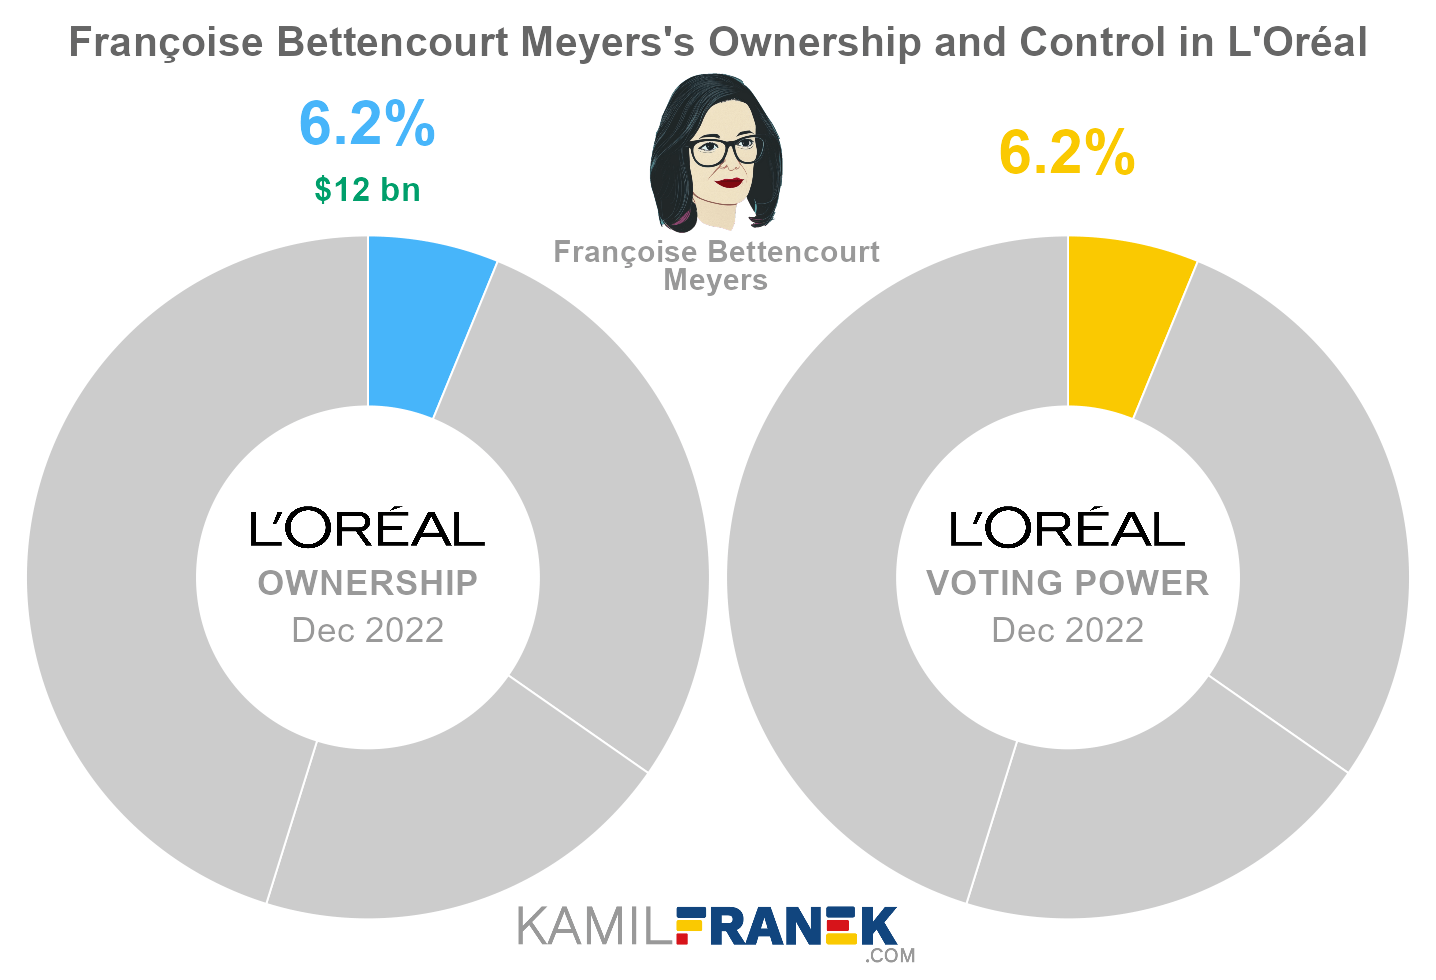 Françoise Bettencourt Meyers's share ownership and voting power in L'Oréal (chart)